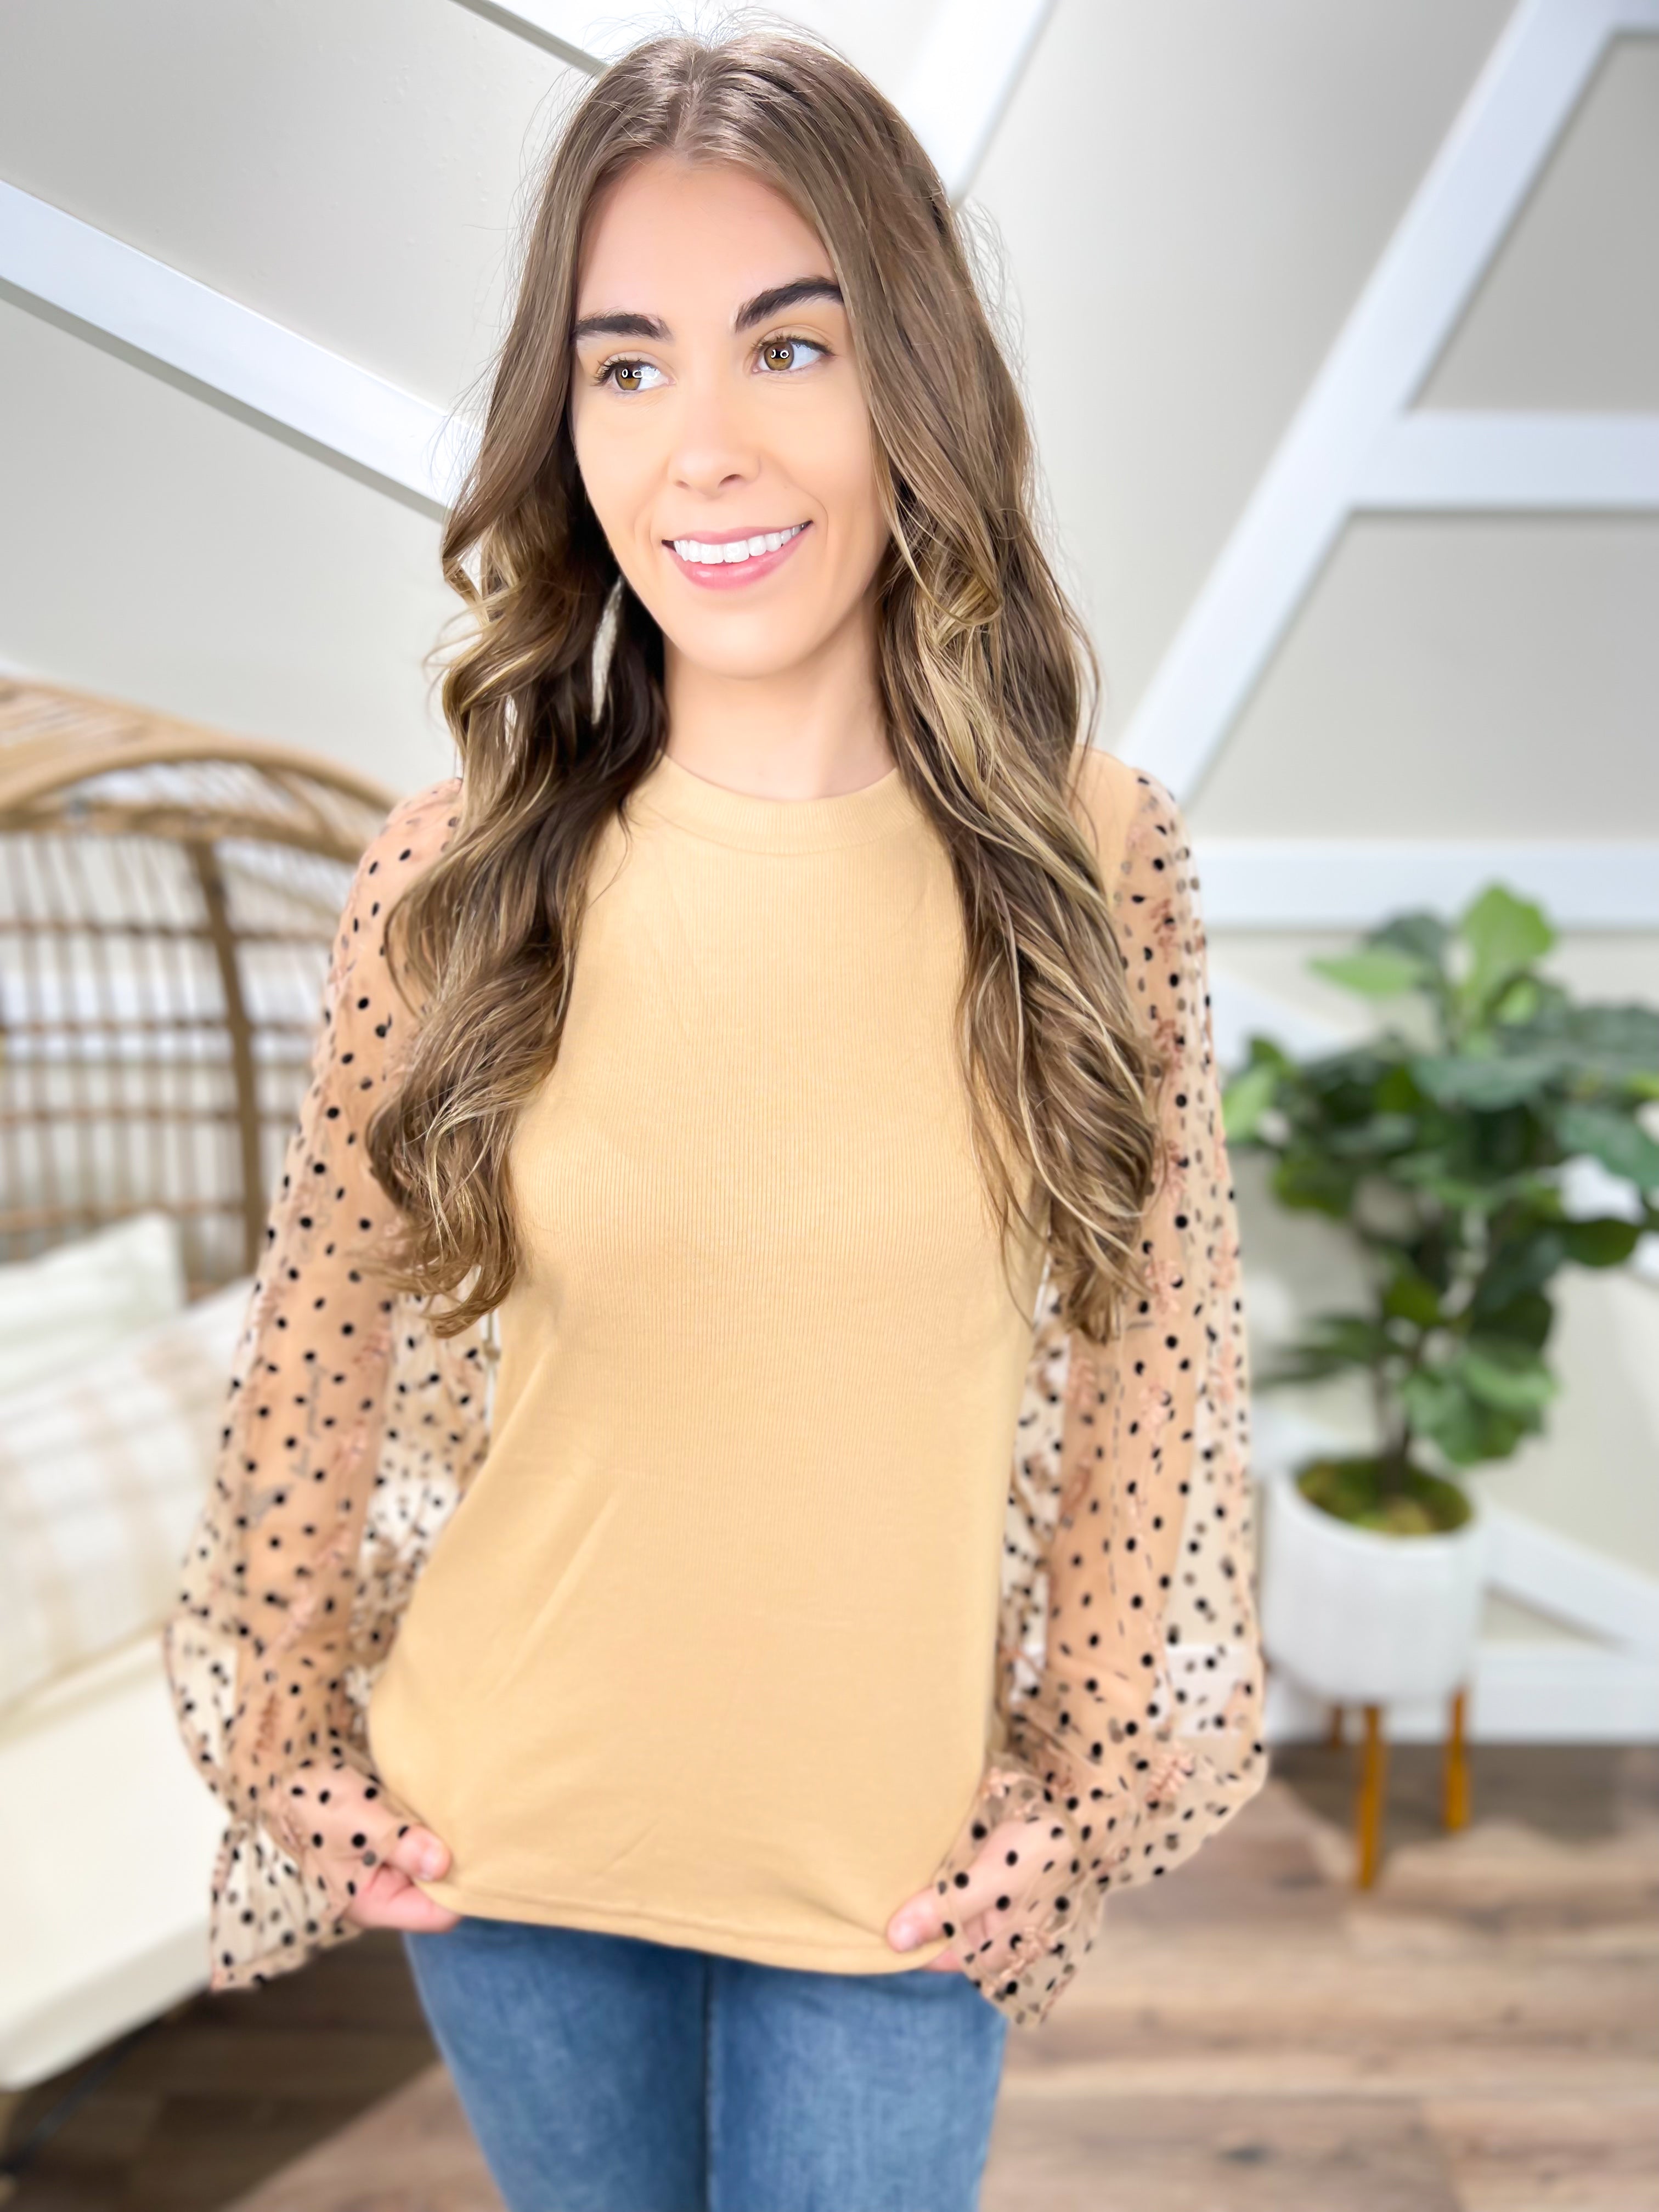 Rock It Polkadot Top-120 Long Sleeve Tops-Polagram-Heathered Boho Boutique, Women's Fashion and Accessories in Palmetto, FL